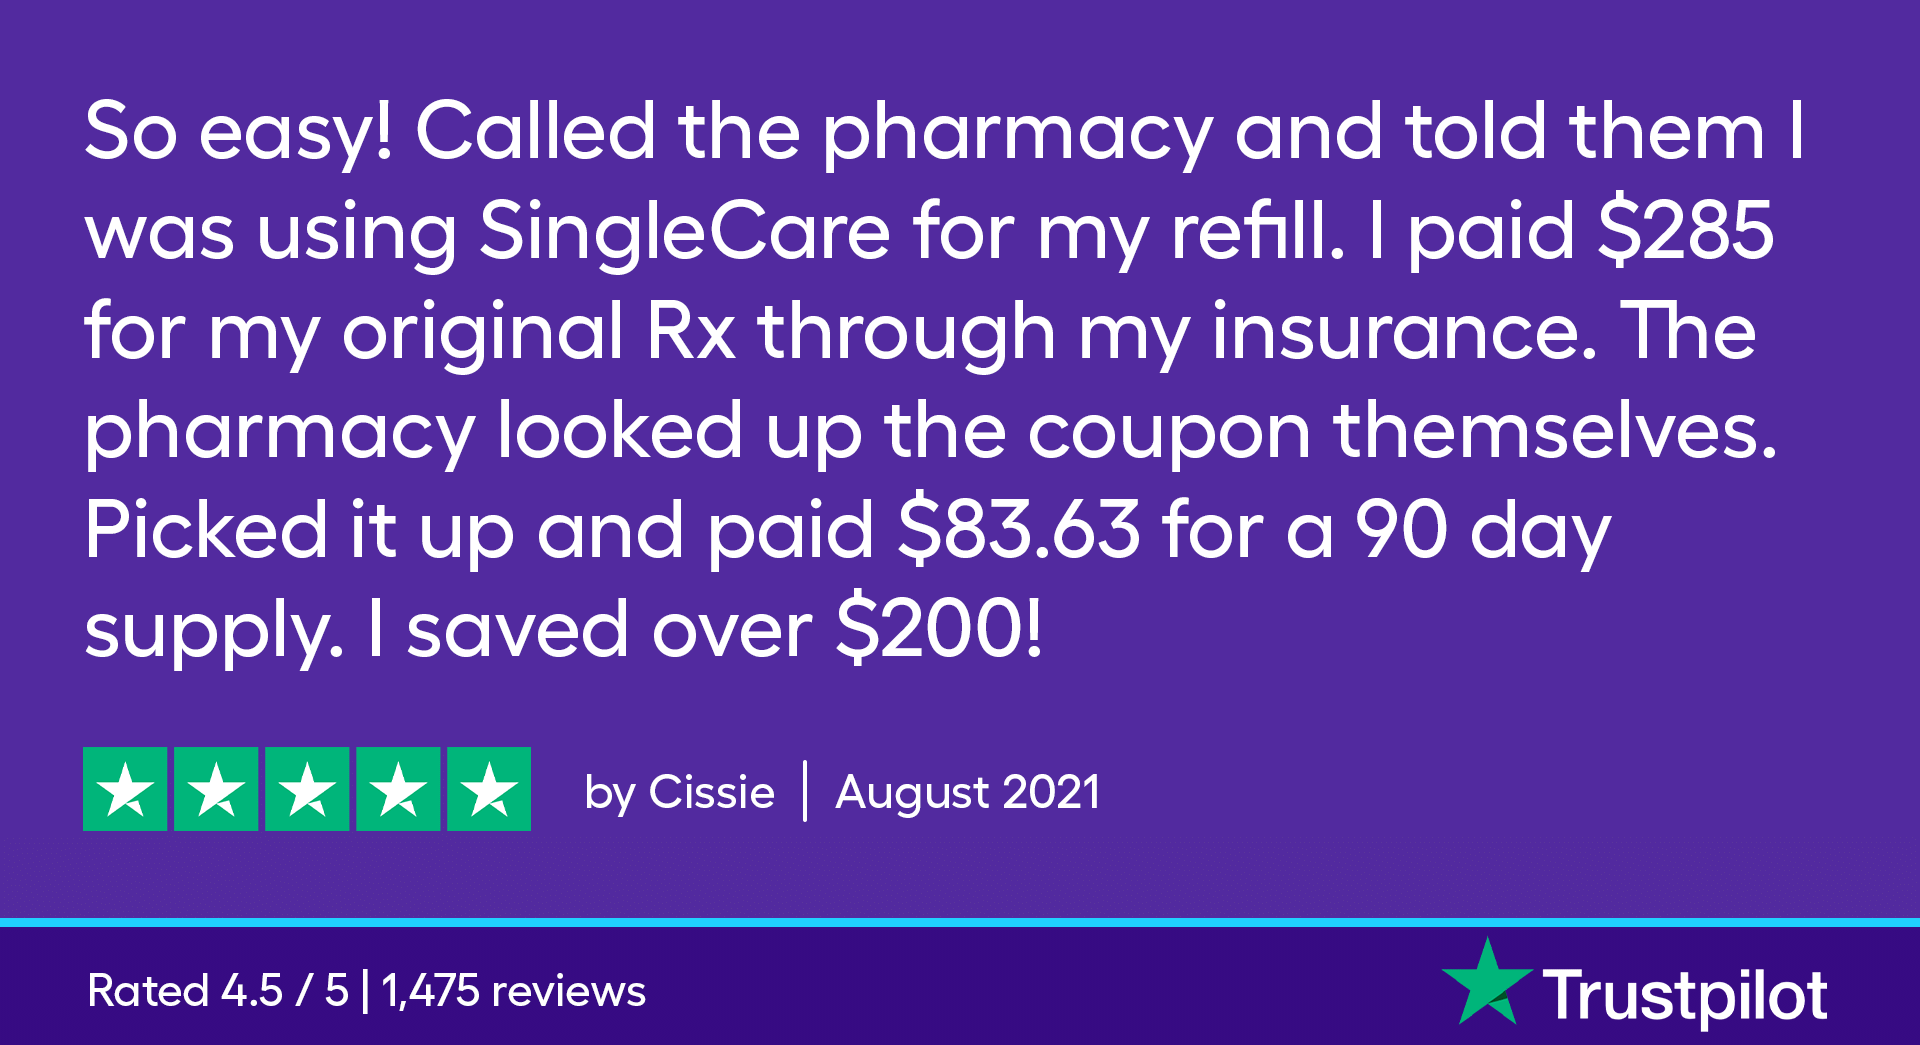 So easy! Called the pharmacy and told them I was using SingleCare for my refill. I paid $285 for my original Rx through my insurance. The pharmacy looked up the coupon themselves. Picked it up and paid $83.63 for a 90 day supply. I saved over $200!